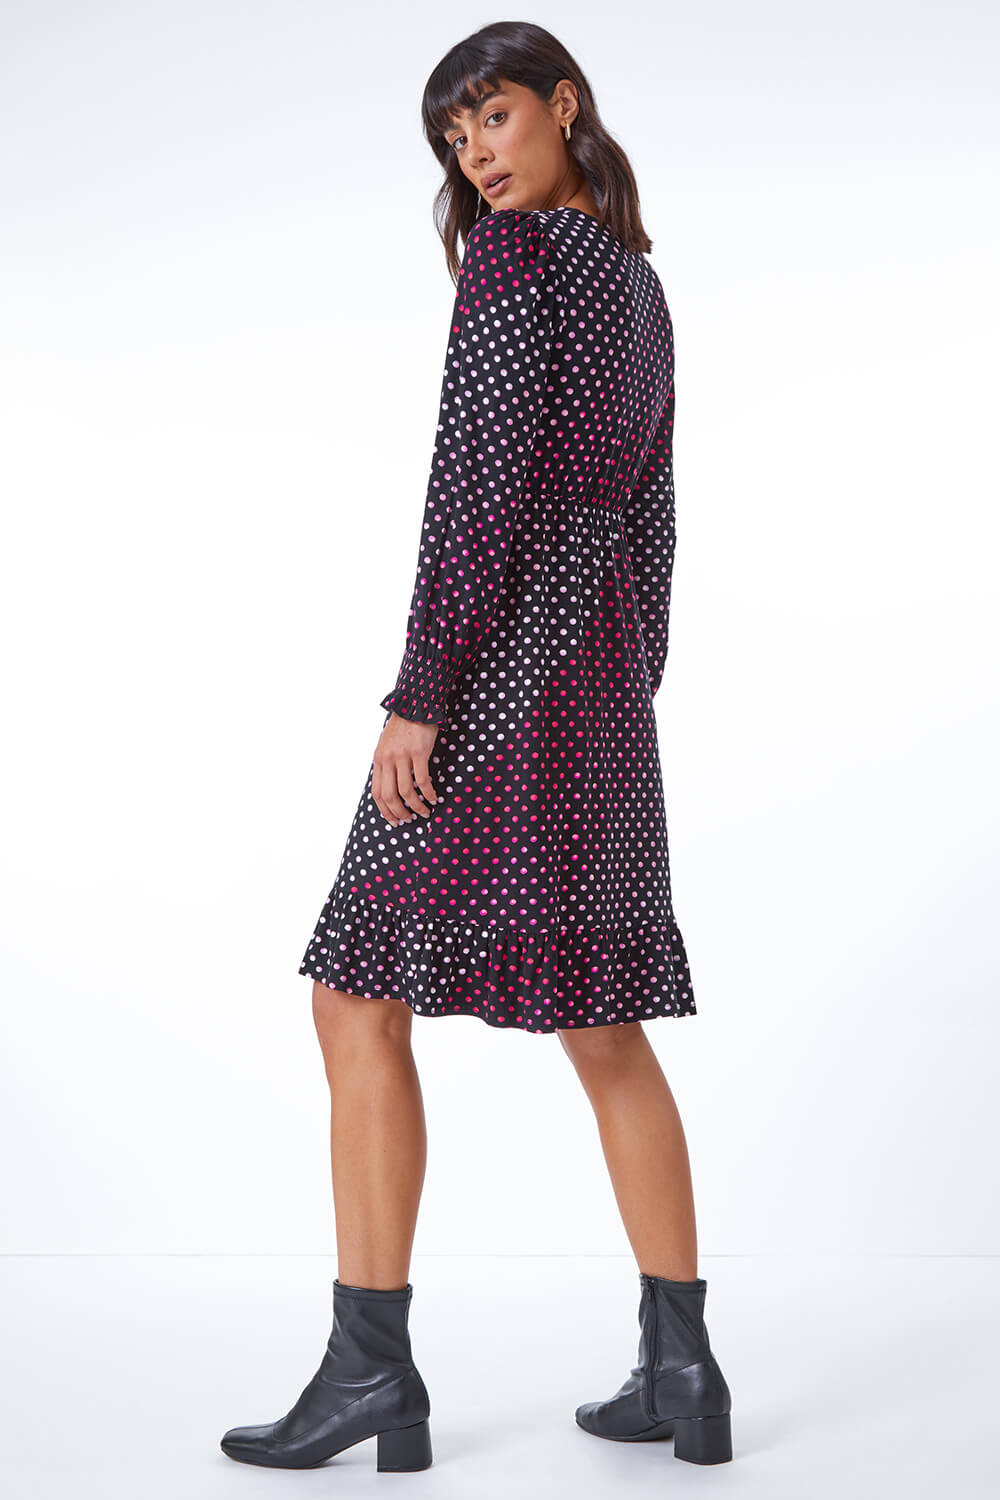 PINK Spot Print Ruched Detail Stretch Dress, Image 3 of 5